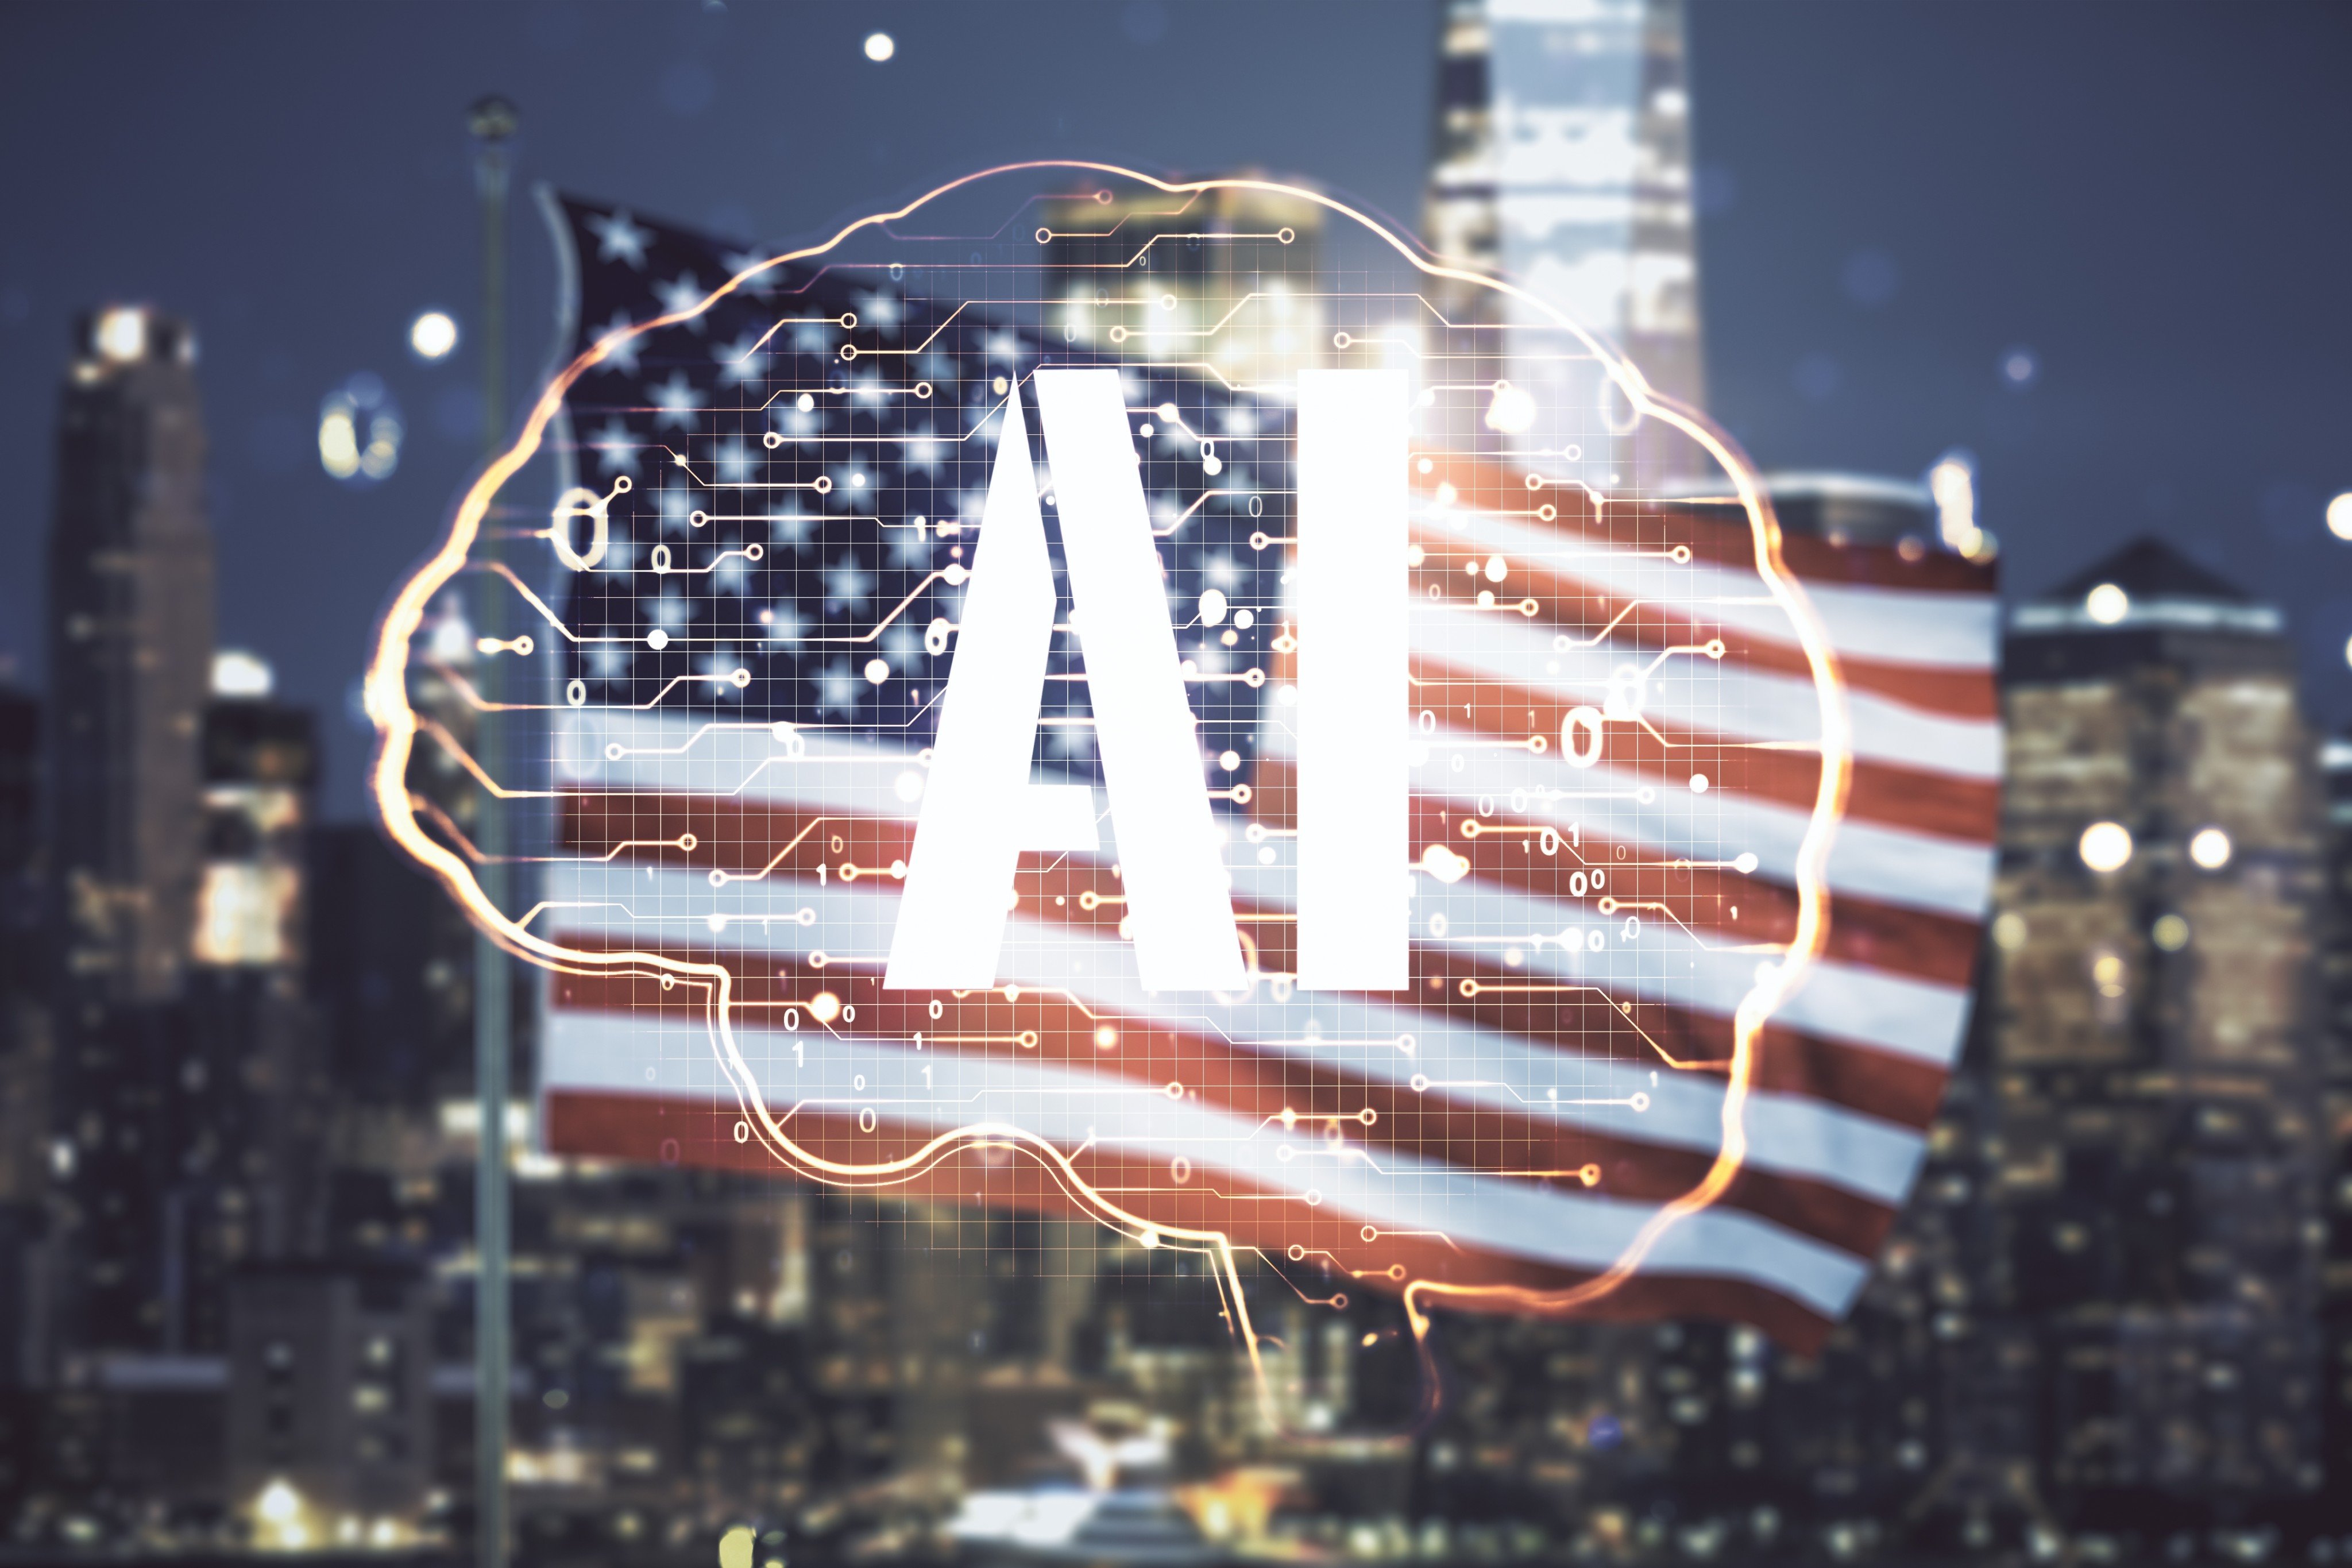 Investors’ ongoing excitement around building and adopting artificial intelligence has fuelled the recovery of venture-capital funding in the United States. Photo: Shutterstock 